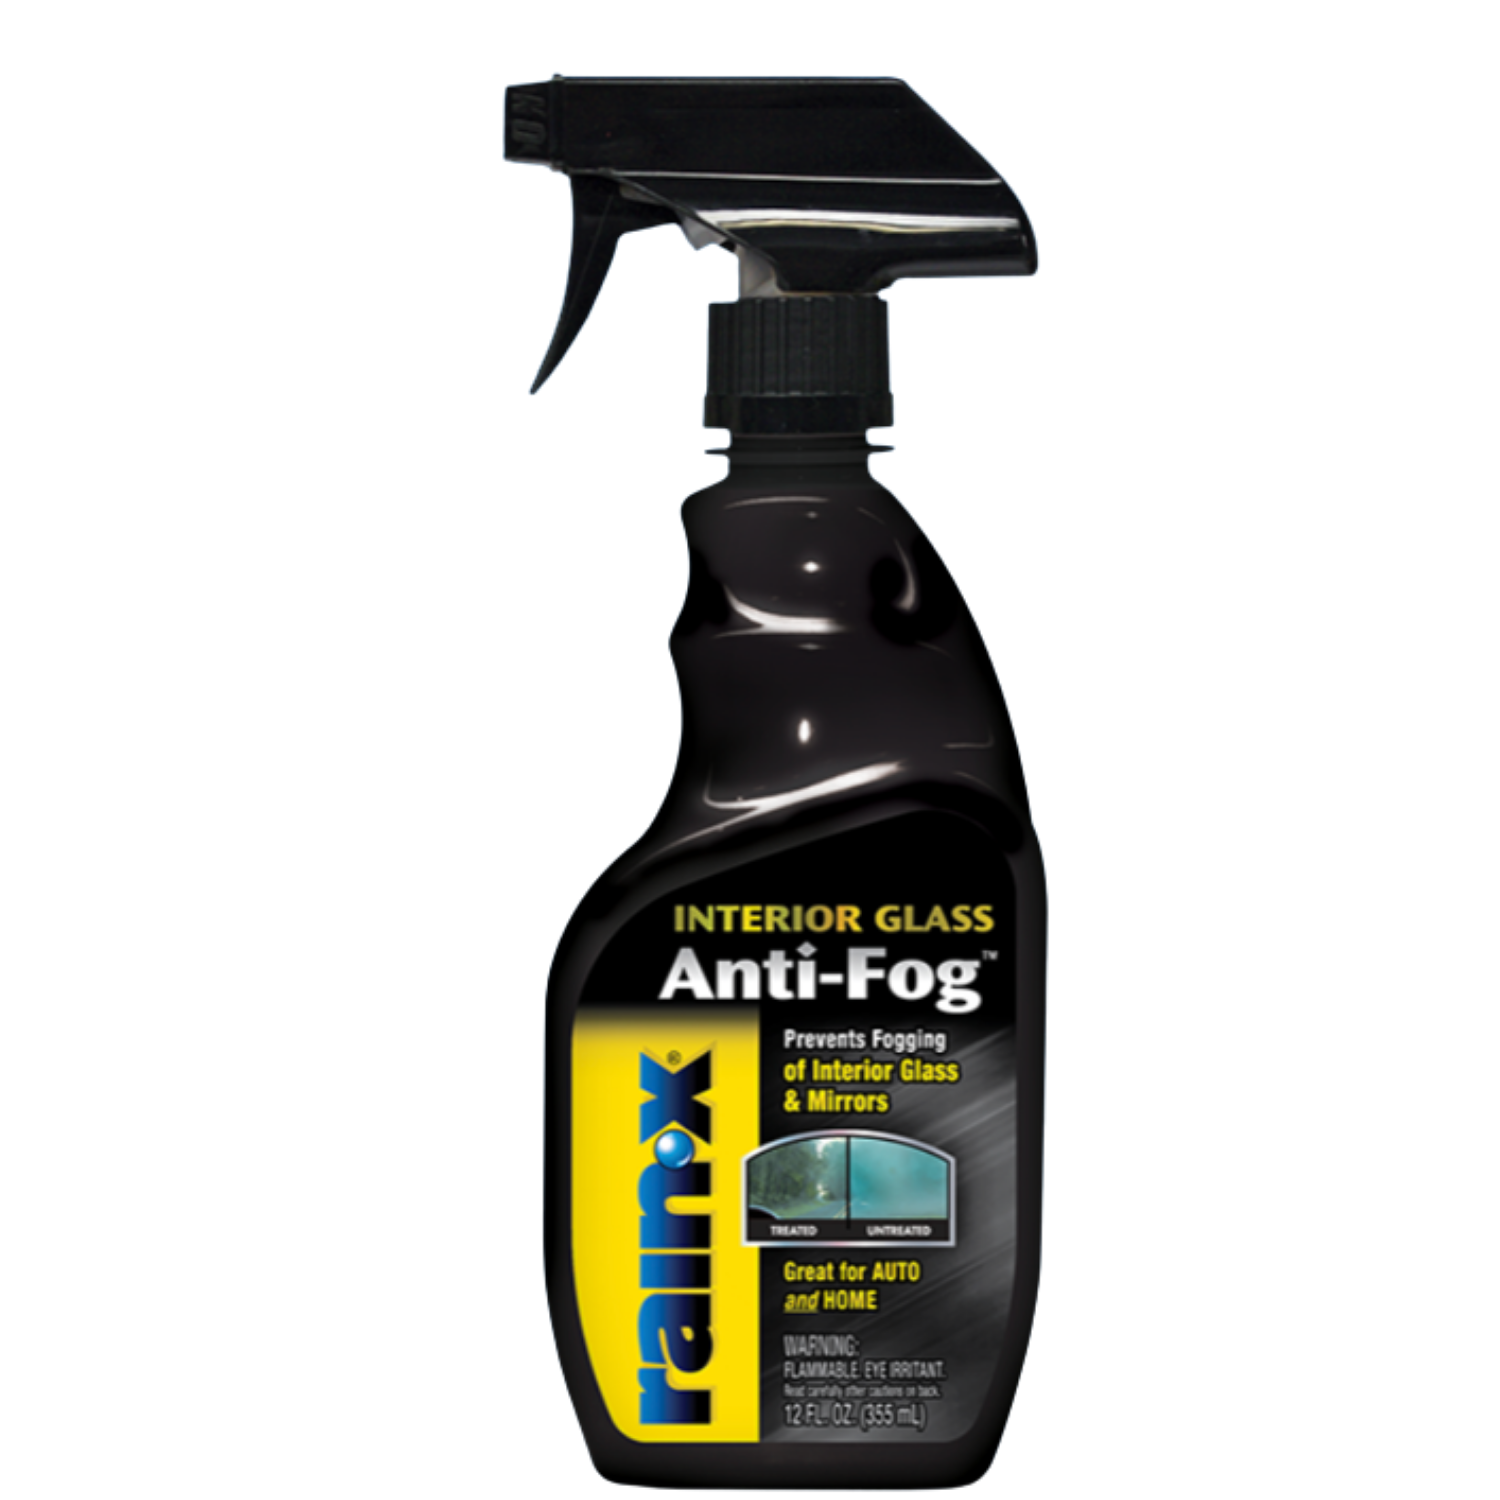 60ML Anti Fog Spray, Auto Windshield Cleaning Agent, Film Coating Agent for  Automotive Interior Glass and Mirrors, Anti Fog Agent for Car Glasses to